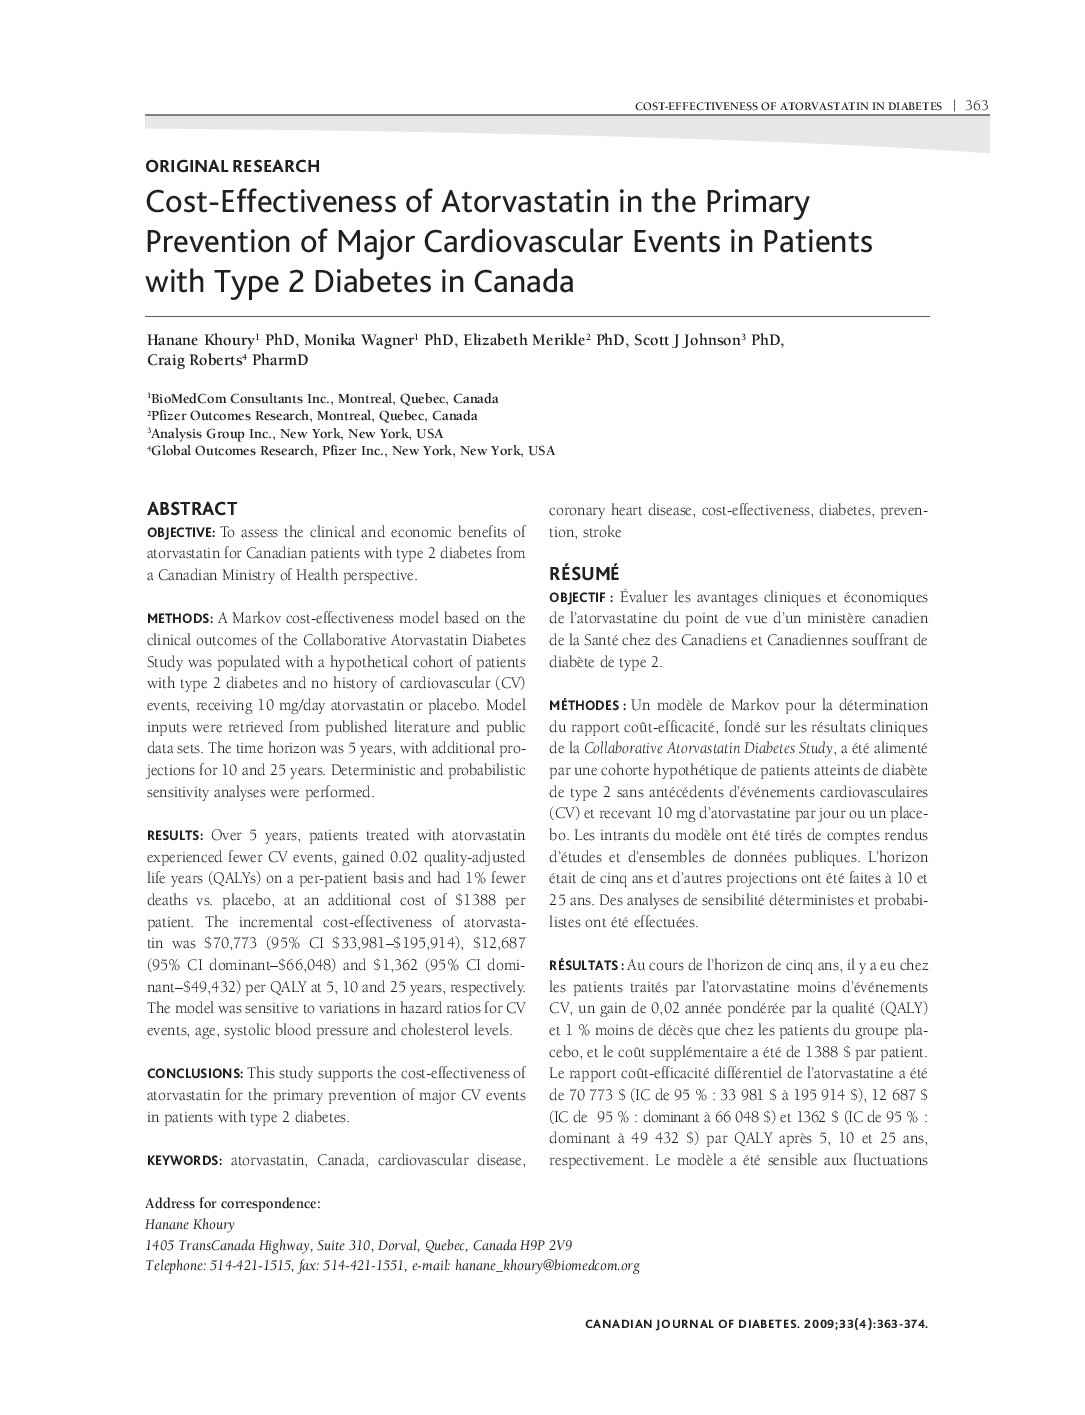 Cost-Effectiveness of Atorvastatin in the Primary Prevention of Major Cardiovascular Events in Patients with Type 2 Diabetes in Canada